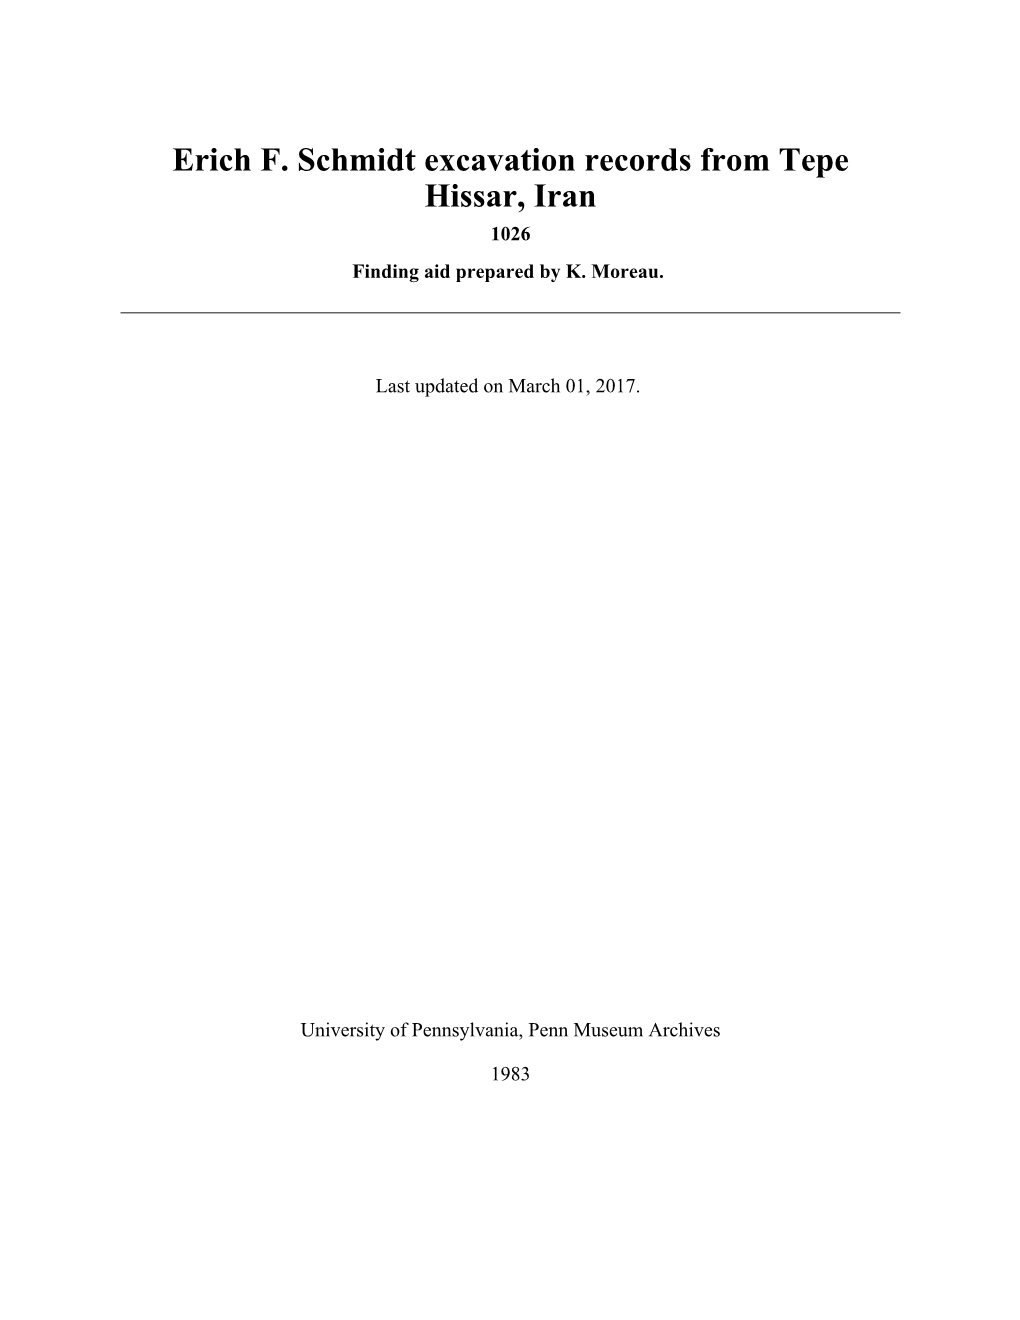 Erich F. Schmidt Excavation Records from Tepe Hissar, Iran 1026 Finding Aid Prepared by K